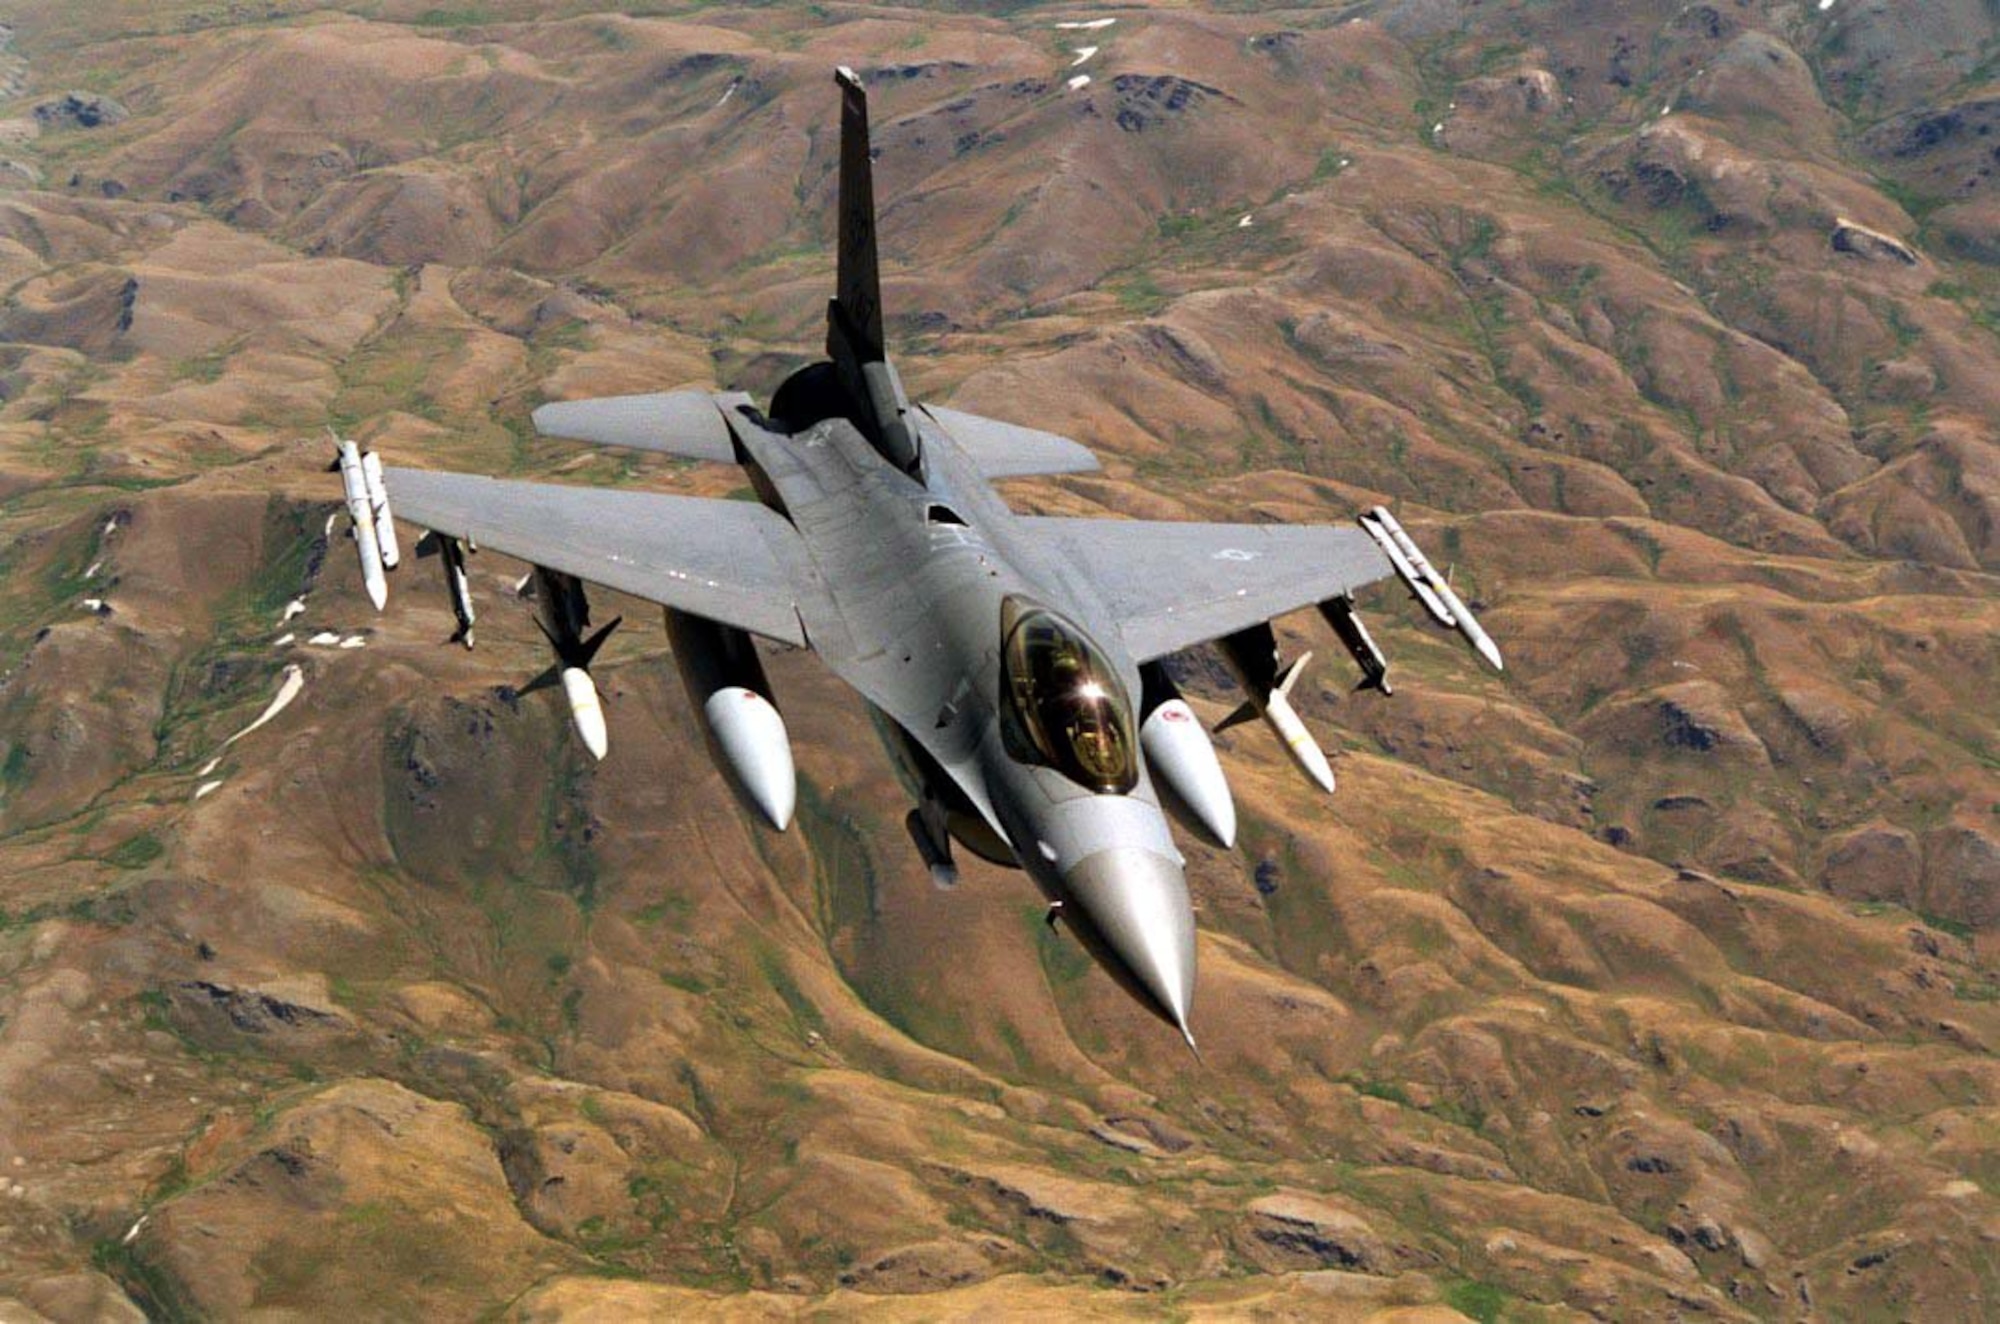 An F-16 Flying Falcon, similar to the one in this photo, crashed near Baghdad, Iraq, Nov. 27. (U.S. Air Force photo) 

